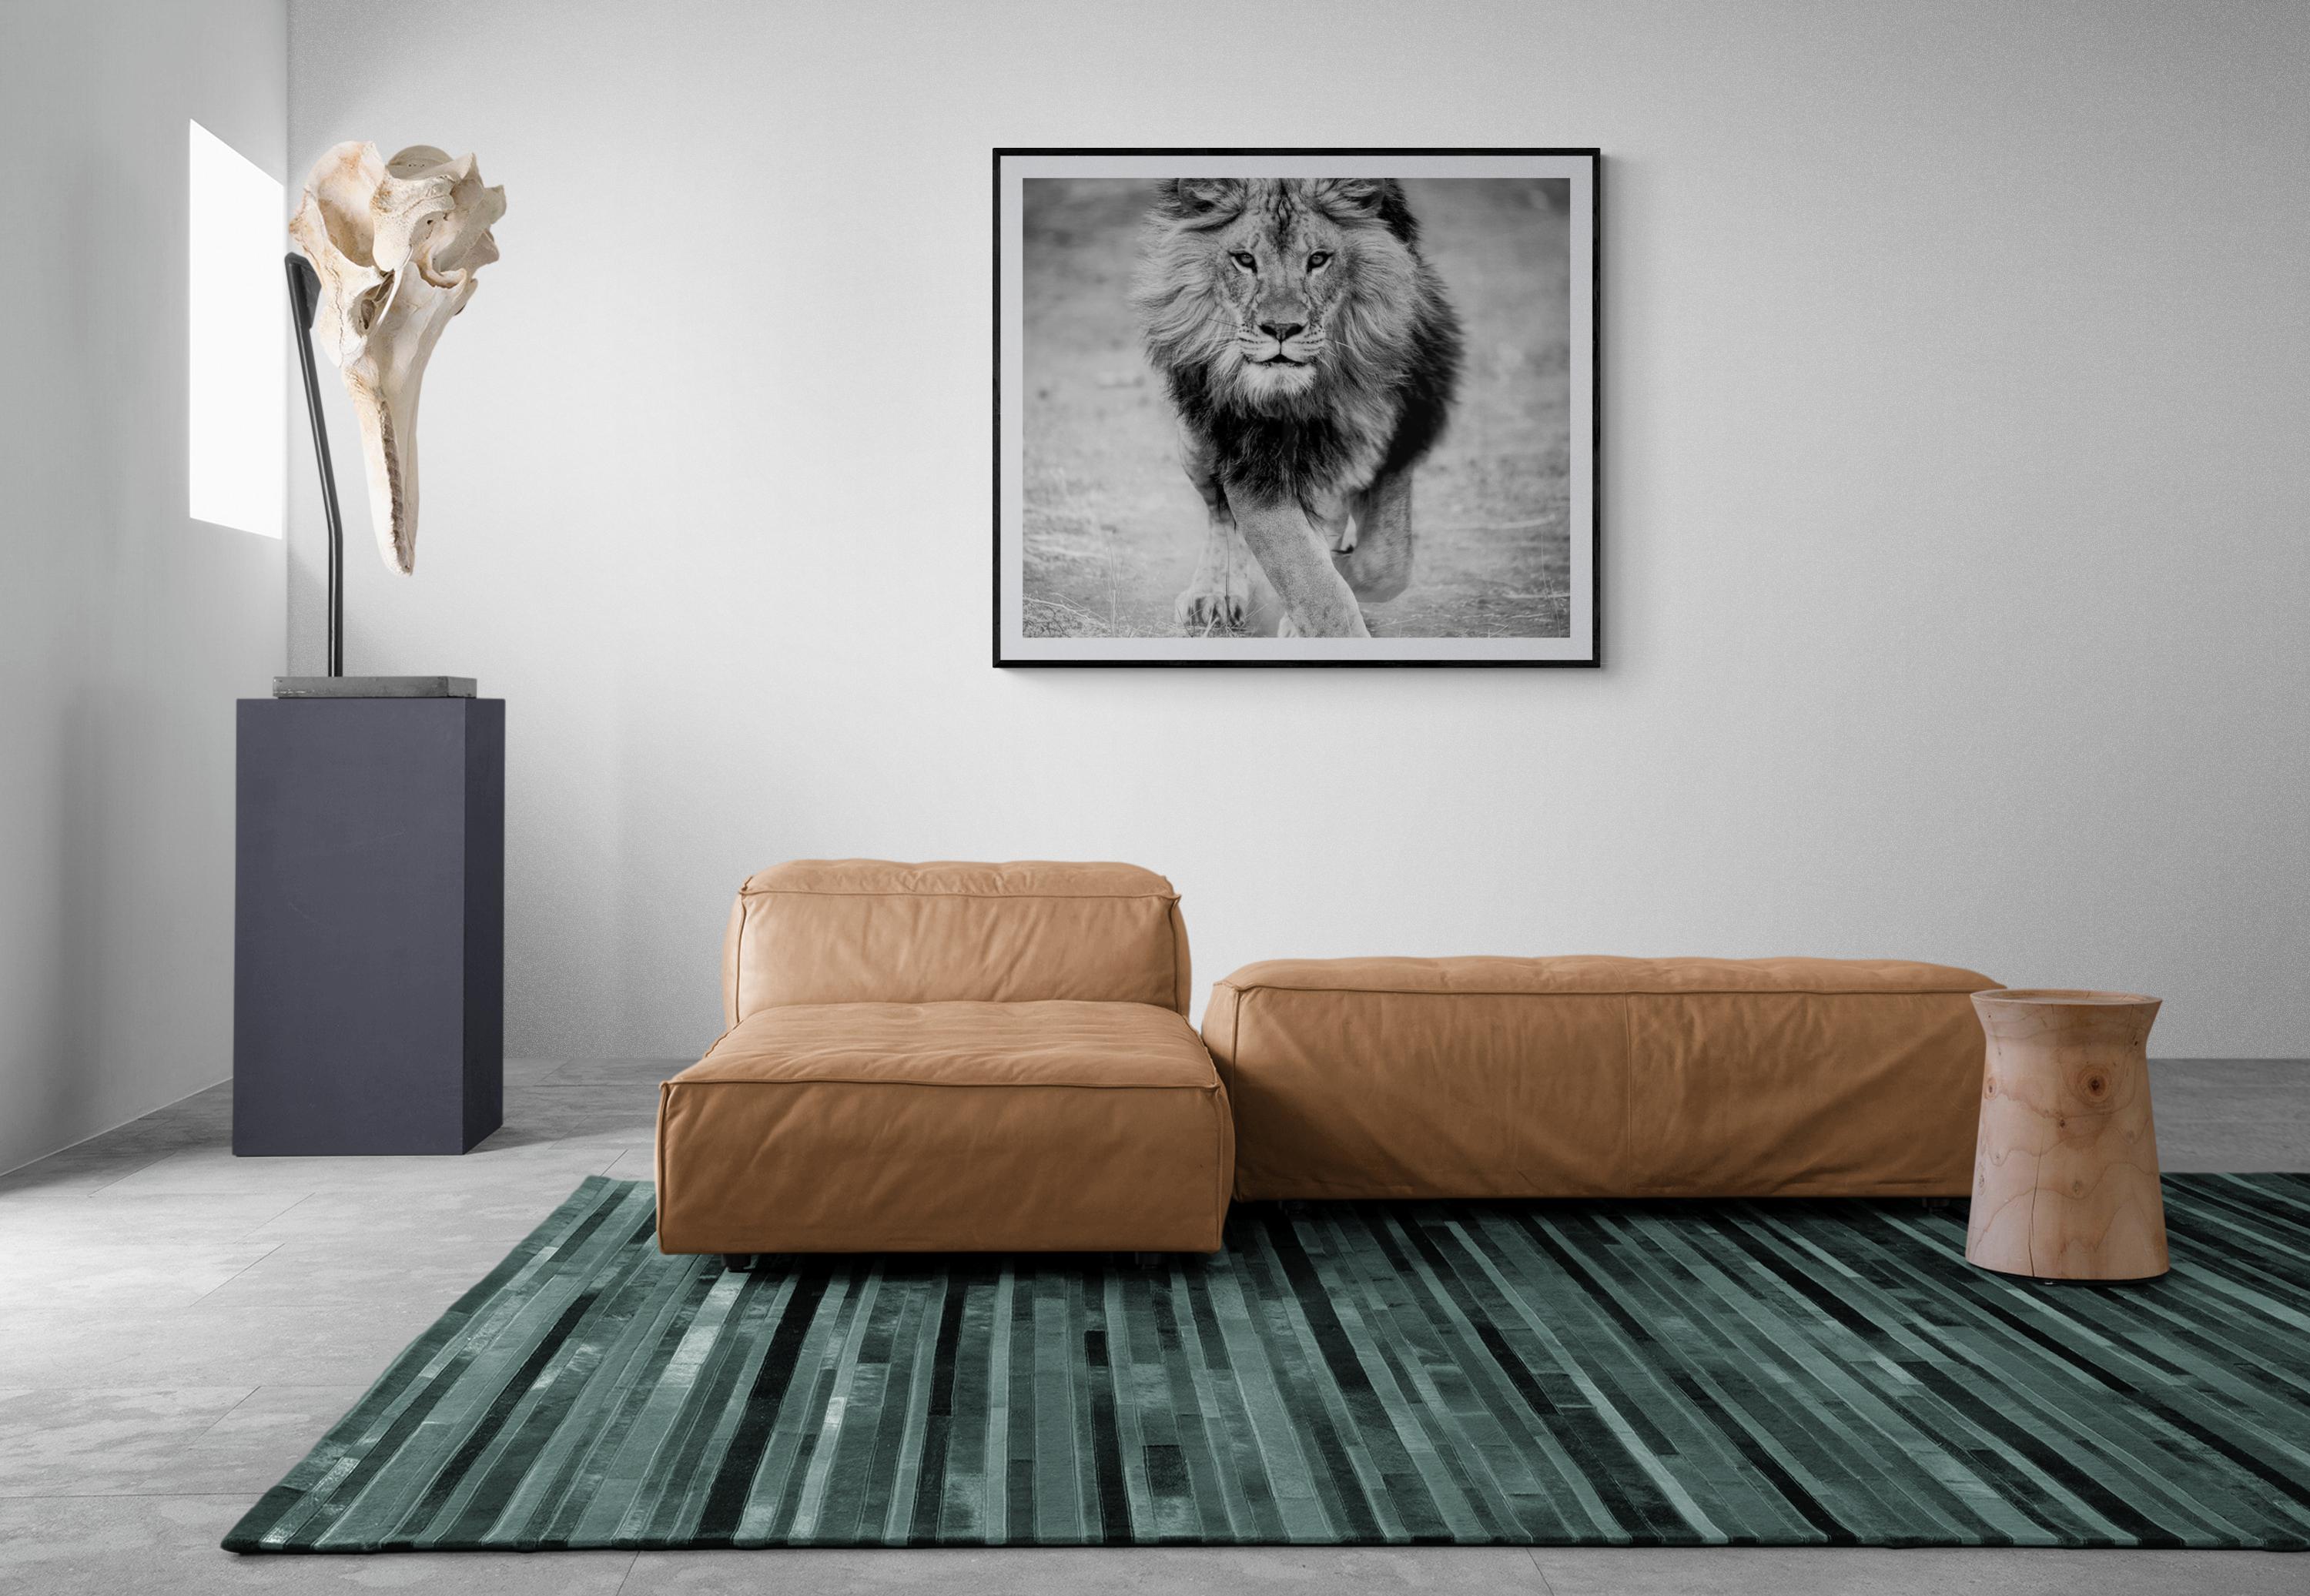 This is a contemporary photograph of an African Lion. 
Printed on archival Kodak Luster paper using archival inks
UV Coated

Framing available. Inquire for rates.  

 Shane Russeck has built a reputation for capturing America's landscapes, cultures